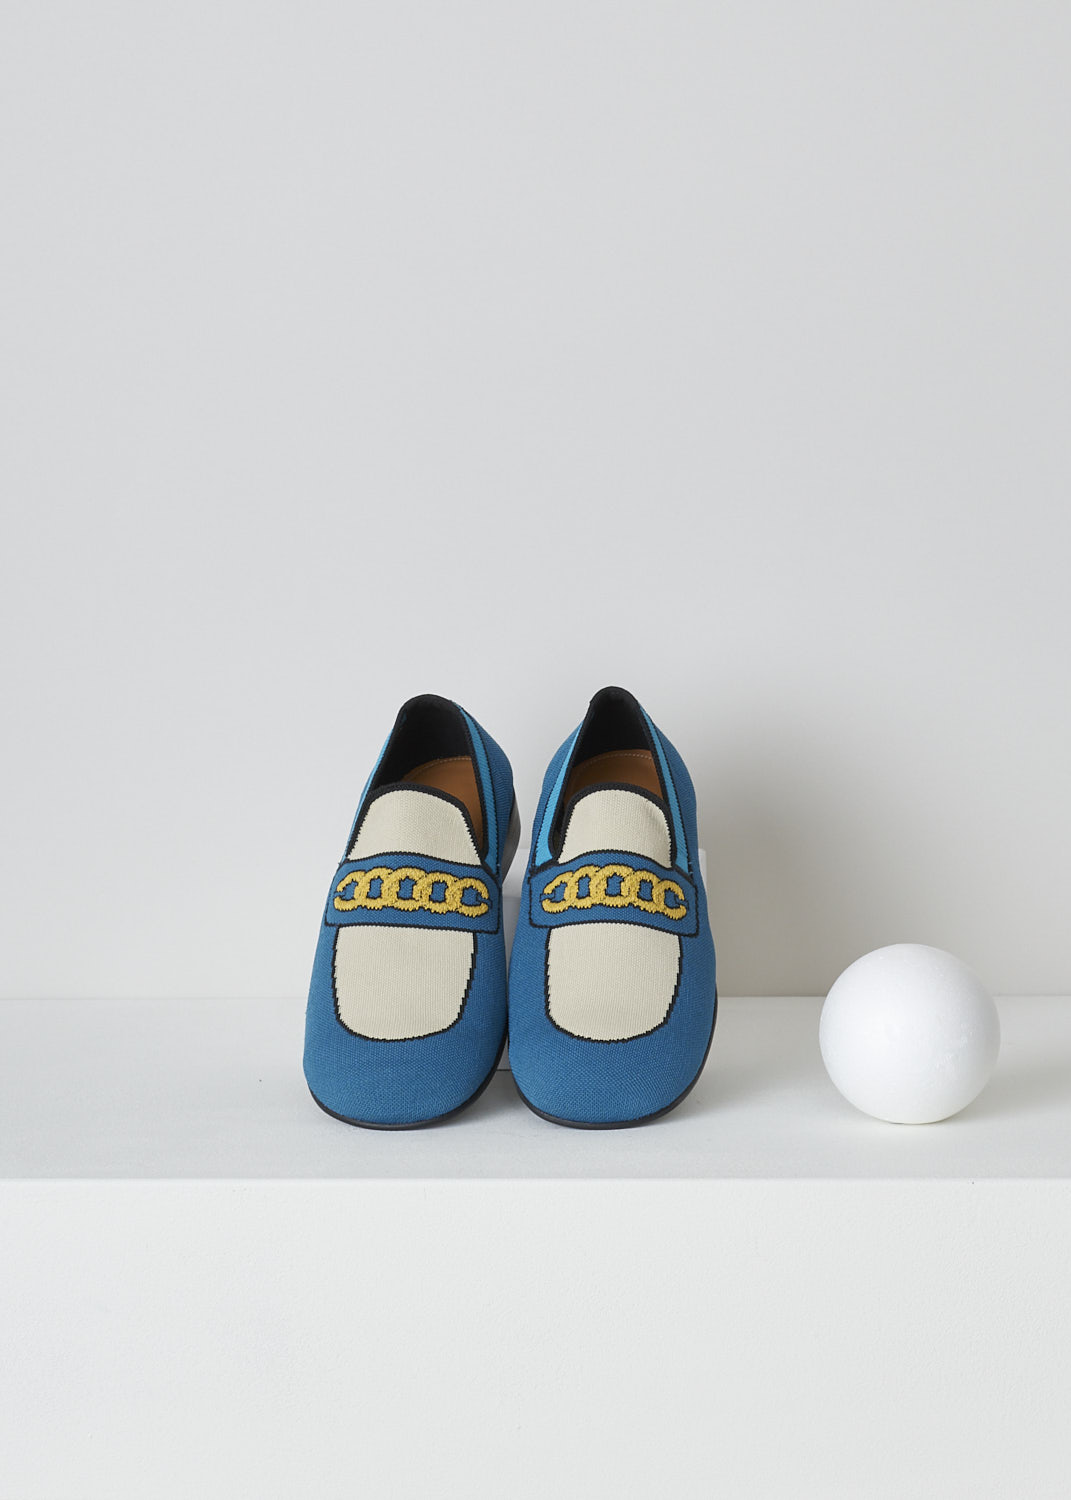 MARNI, BLUE TROMPE L'OEIL JACQUARD MOCASSINS, MOMS003601_P4547_ZO122, Blue, Top, These blue knitted moccasins have a trompe l'oeil image woven into them which depicts the different parts of the shoe and a gold chain across the vamp. These moccasins have a round toe and flat rubber sole with a small heel. 

